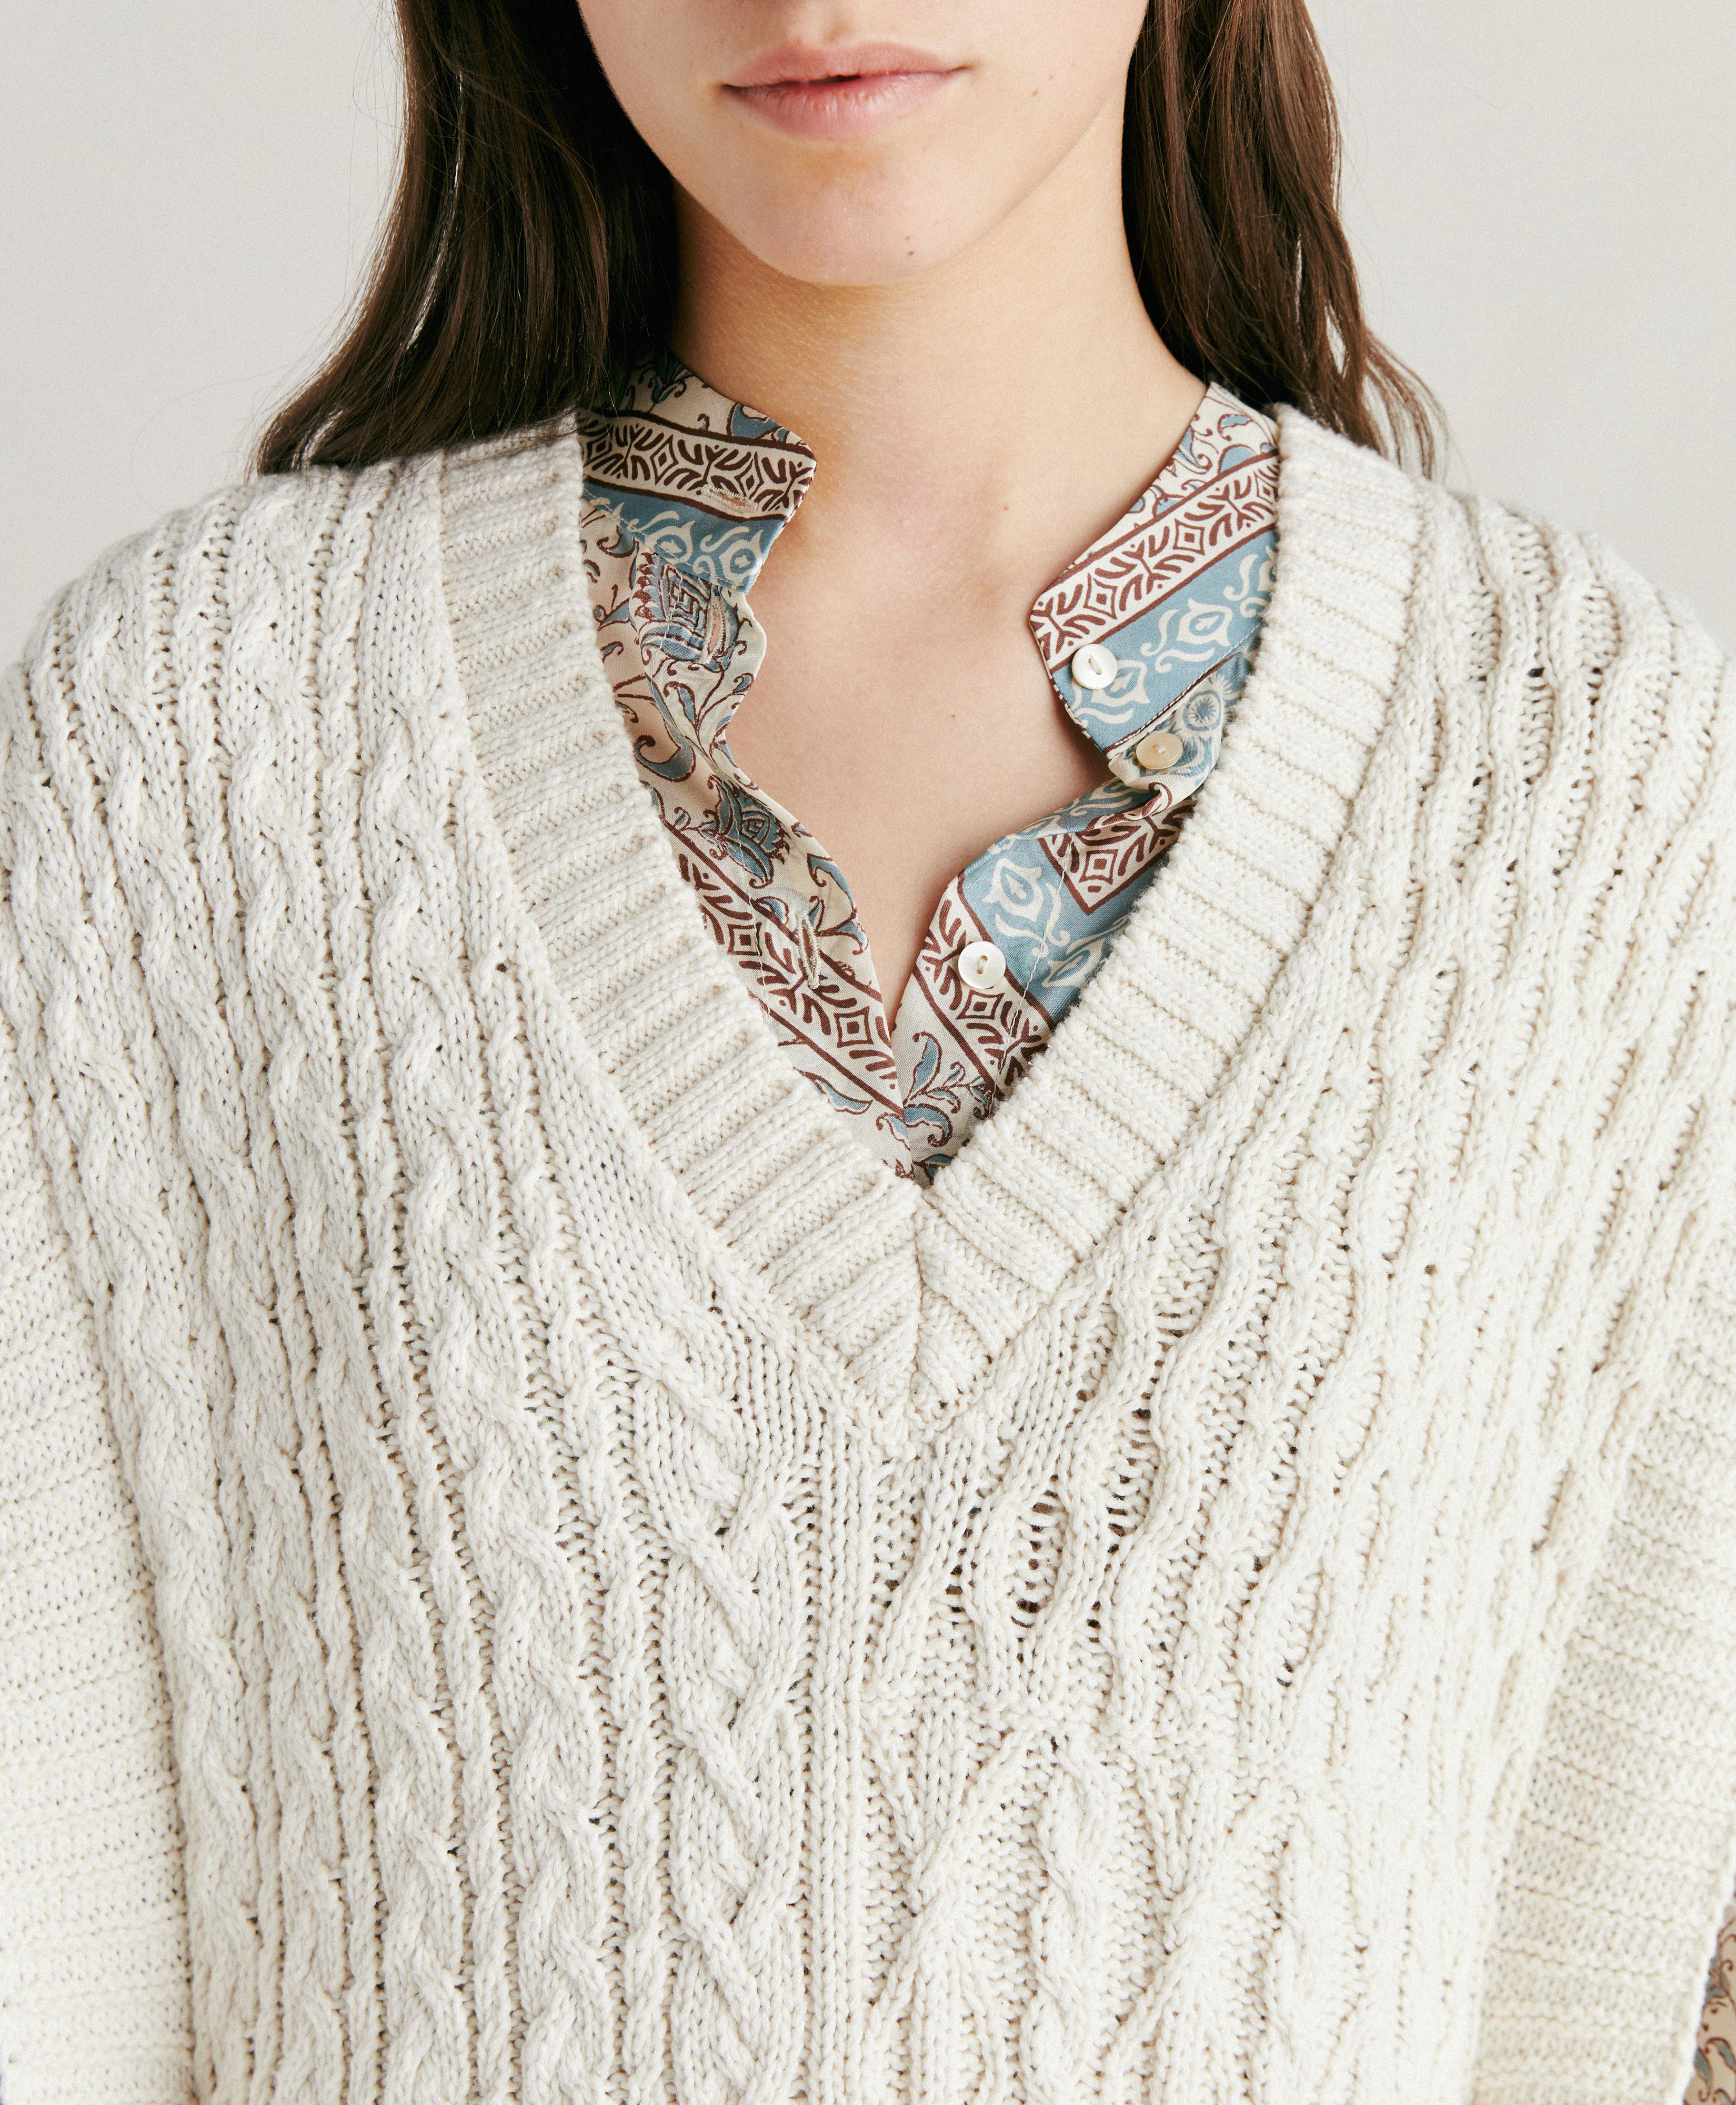 ARENE KNITWEAR WITH MIXED STITCHES - CREAM - Momonì